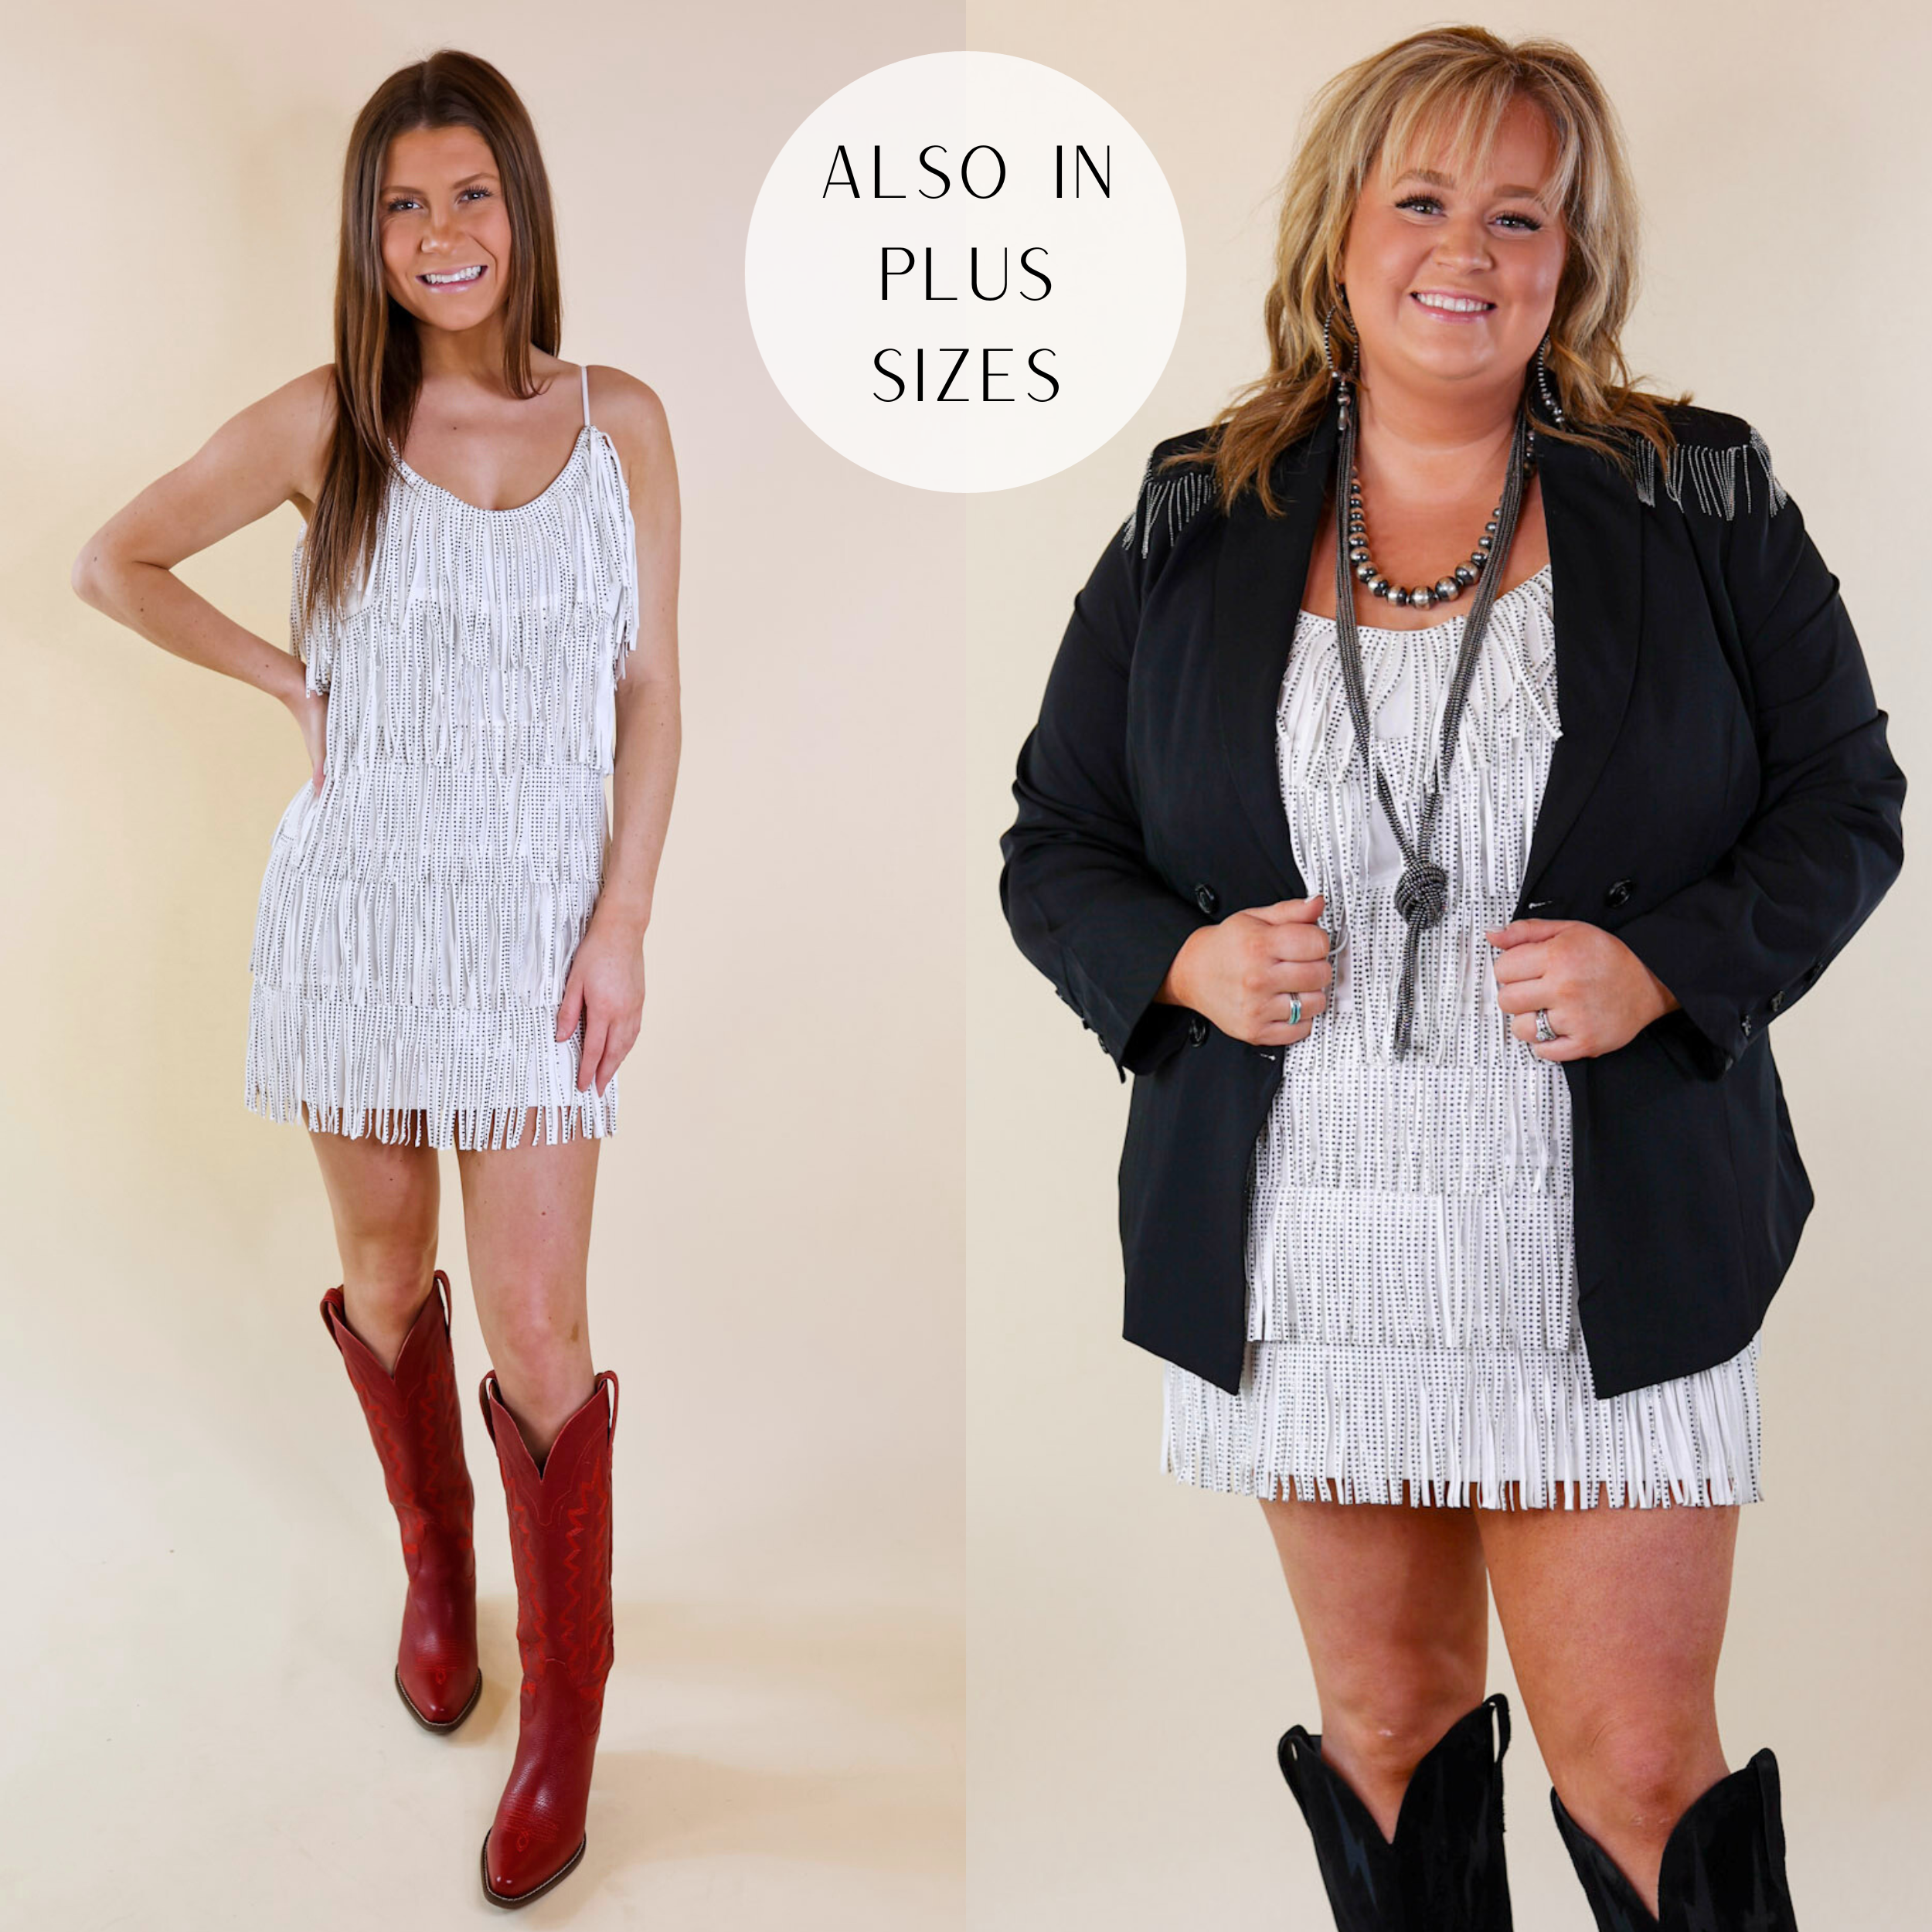 Model is wearing a short white dress that has crystal fringe all over and spaghetti straps. Model has it paired with red boots. Plus size model has it paired with black boots, a black fringe jacket, and silver jewelry.